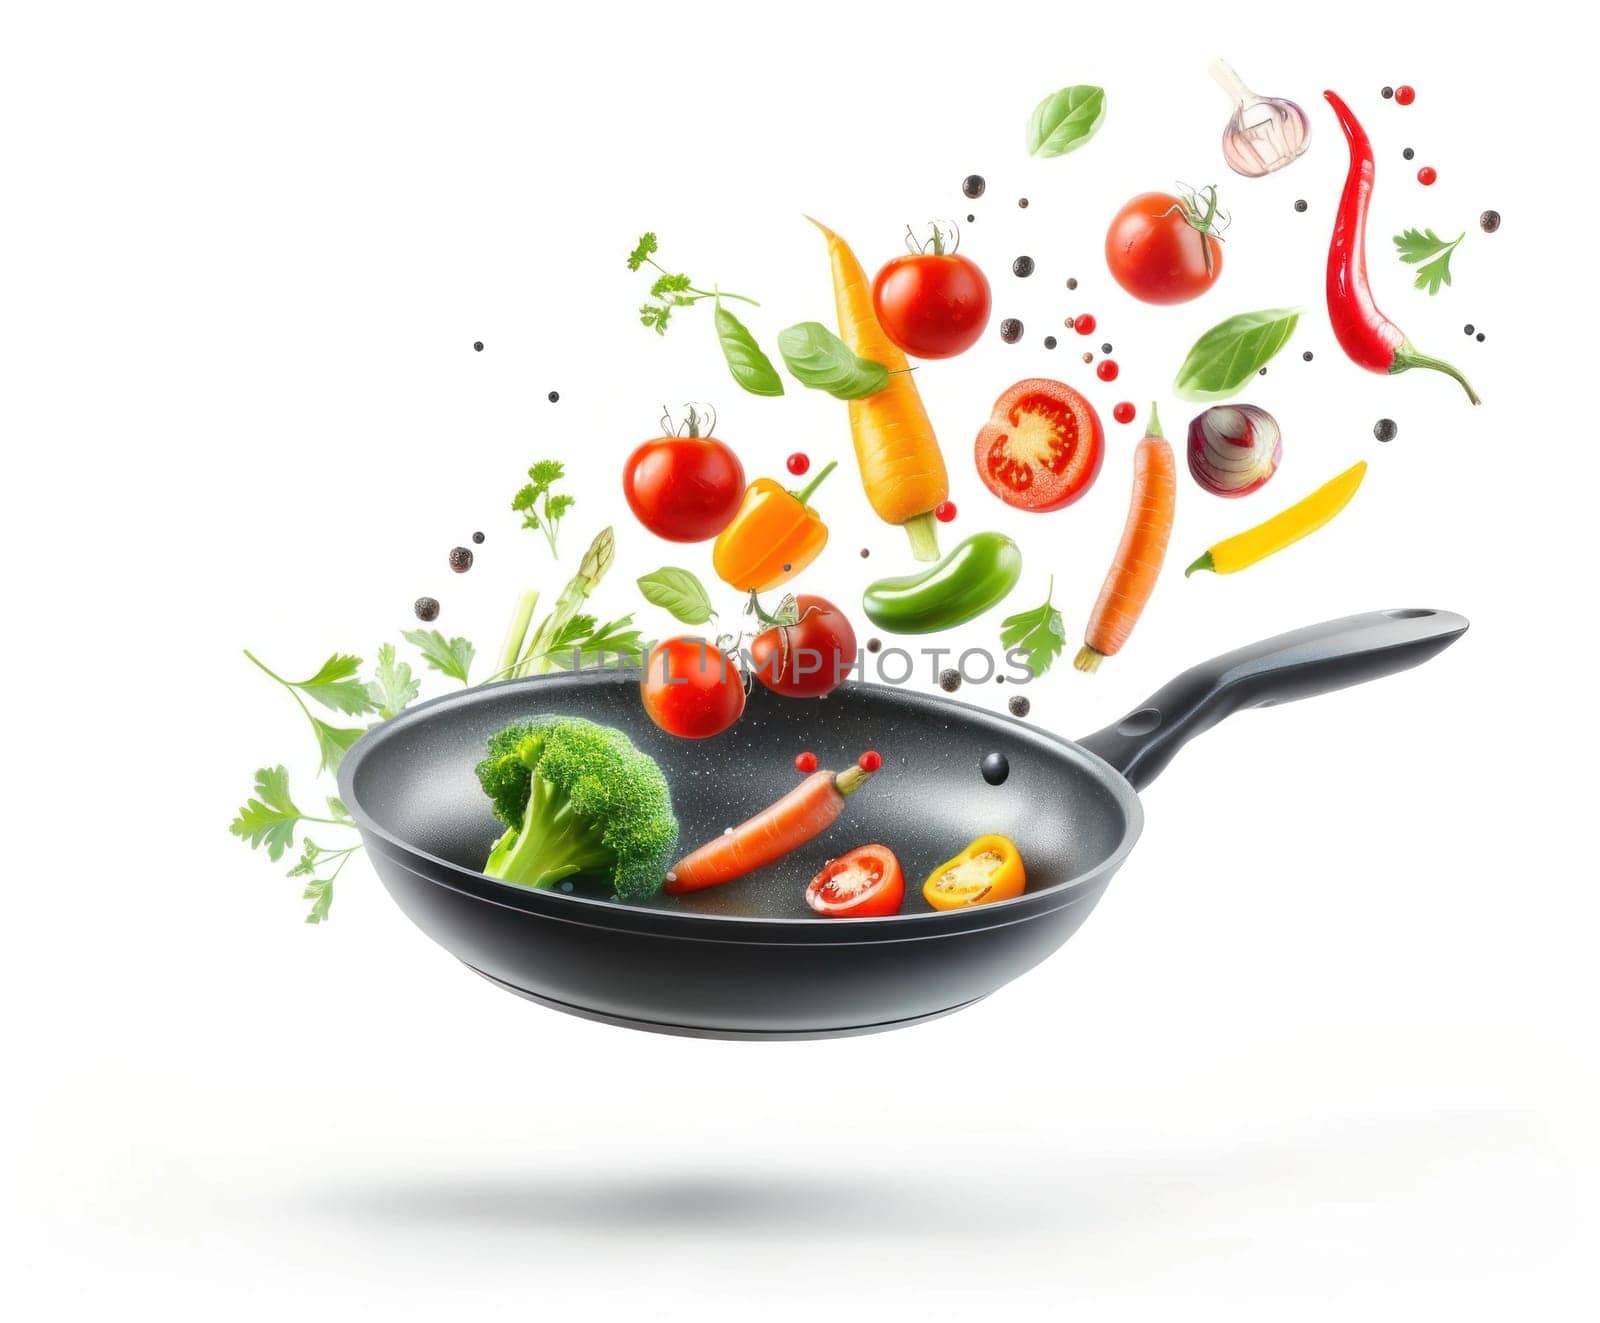 Flying vegetables in frying pan on white background for culinary concept and healthy cooking ideas by Vichizh